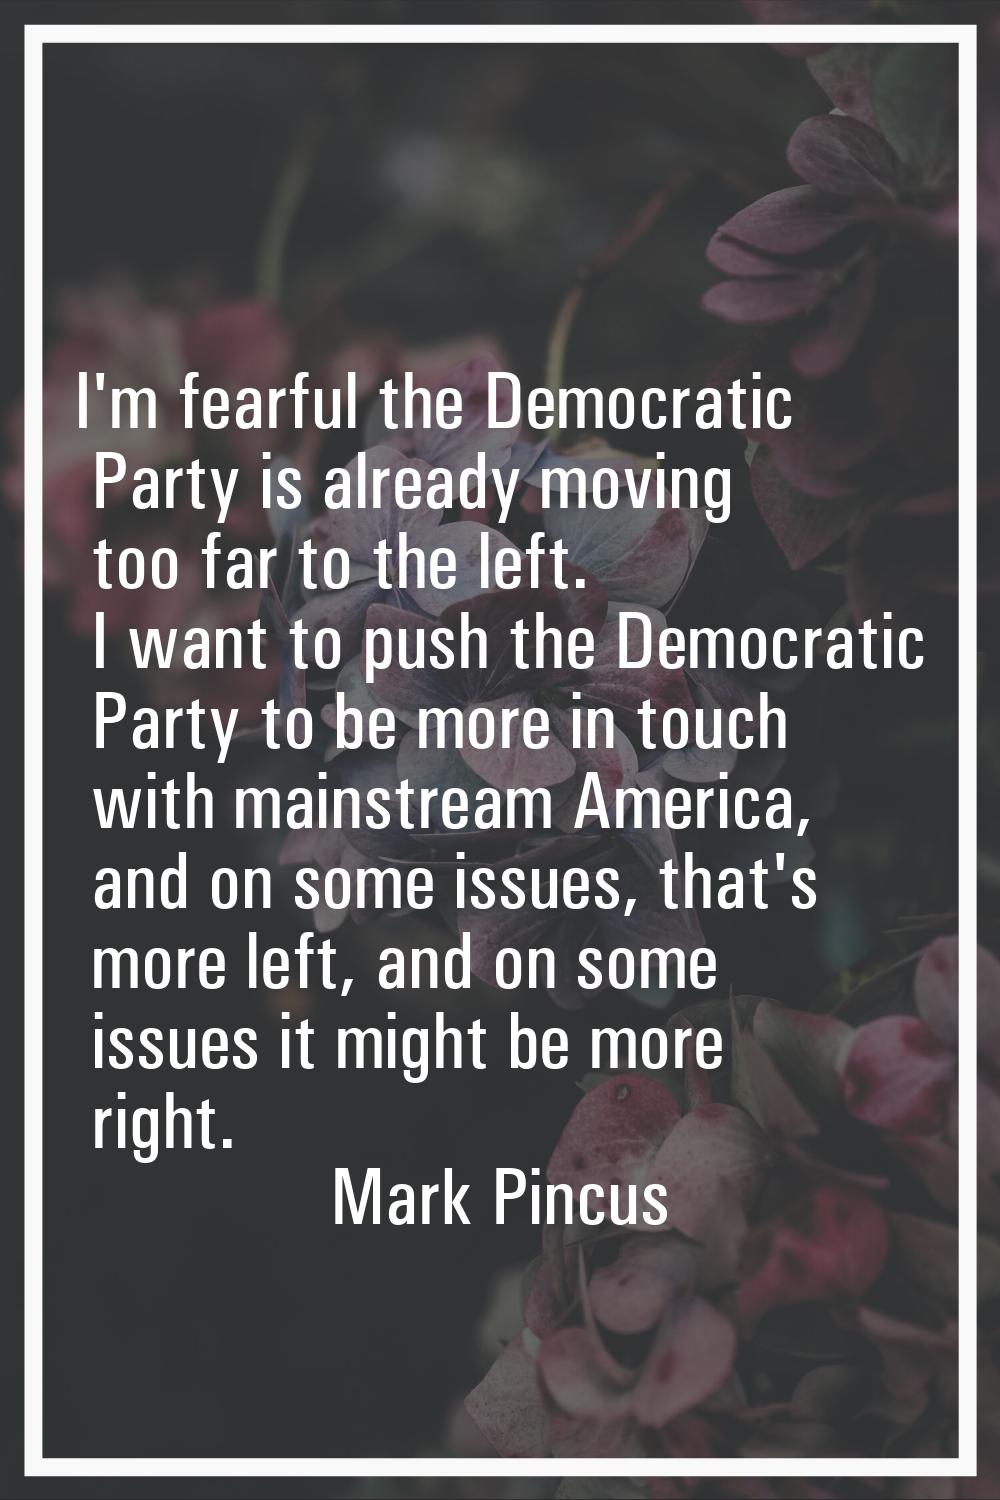 I'm fearful the Democratic Party is already moving too far to the left. I want to push the Democrat